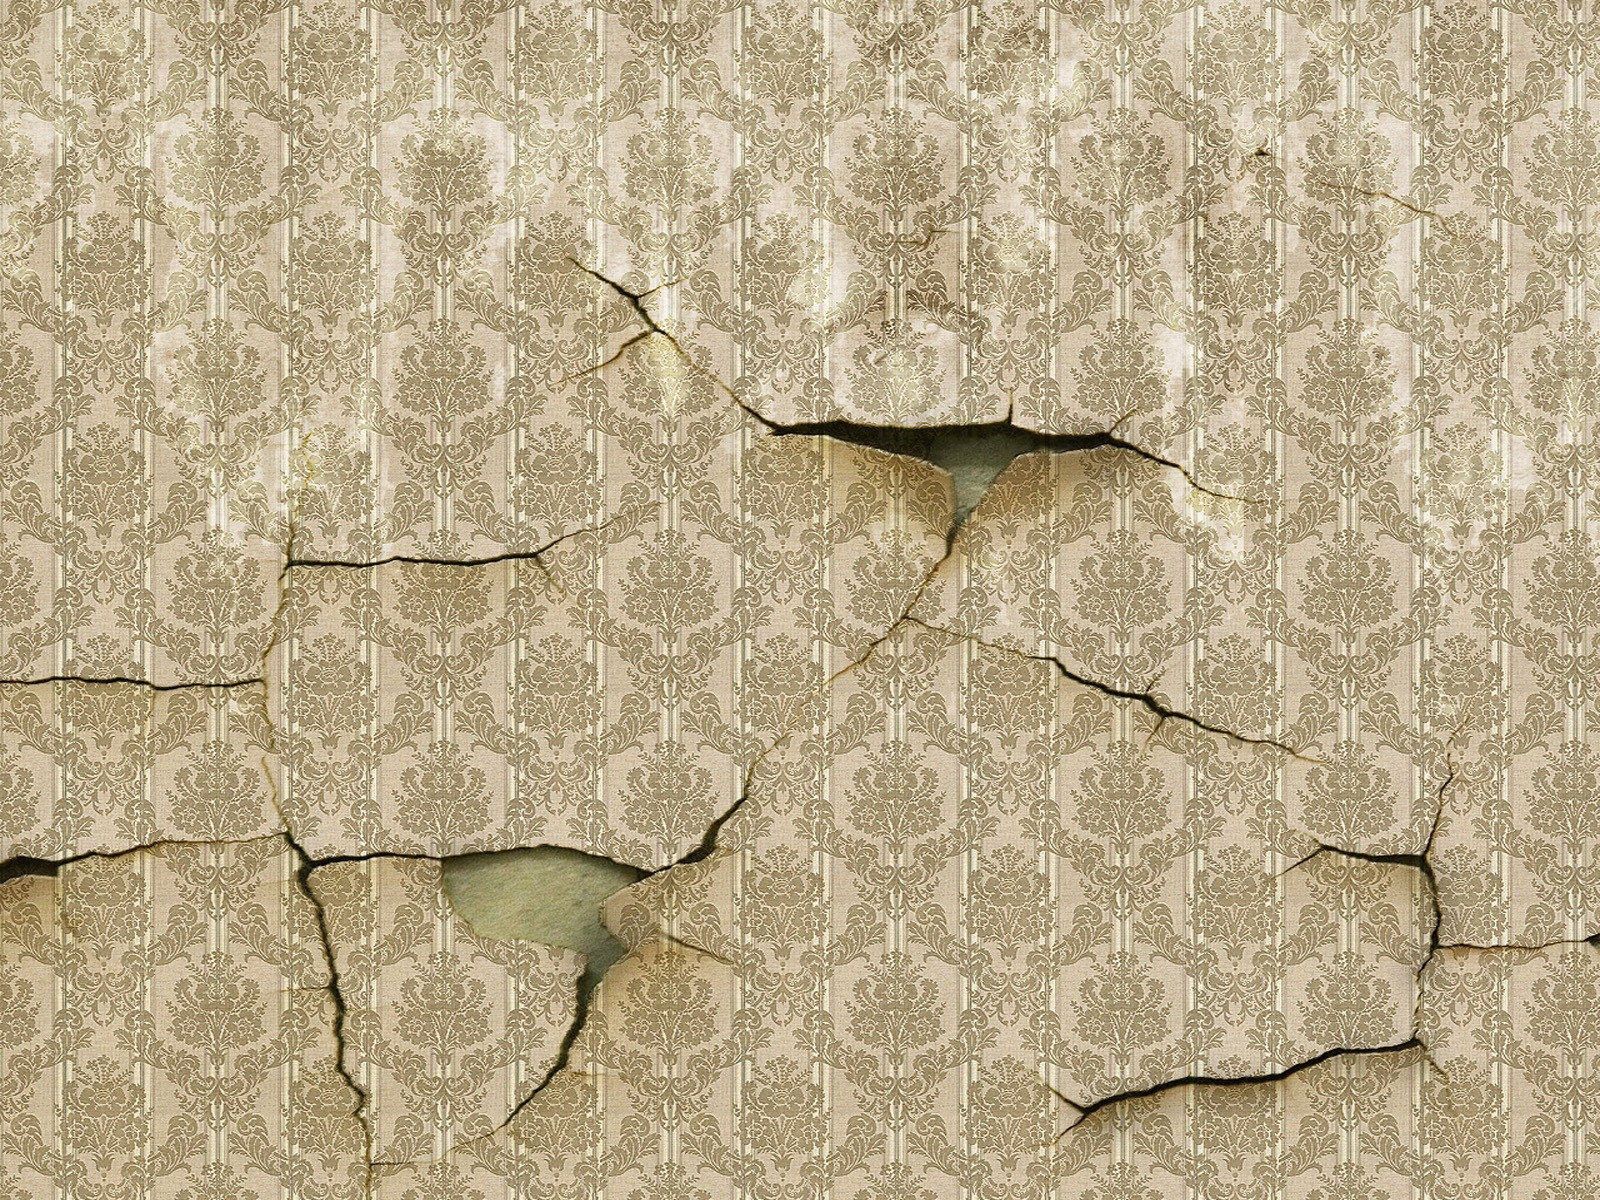 Smartphone Background wall, cracks, textures, old